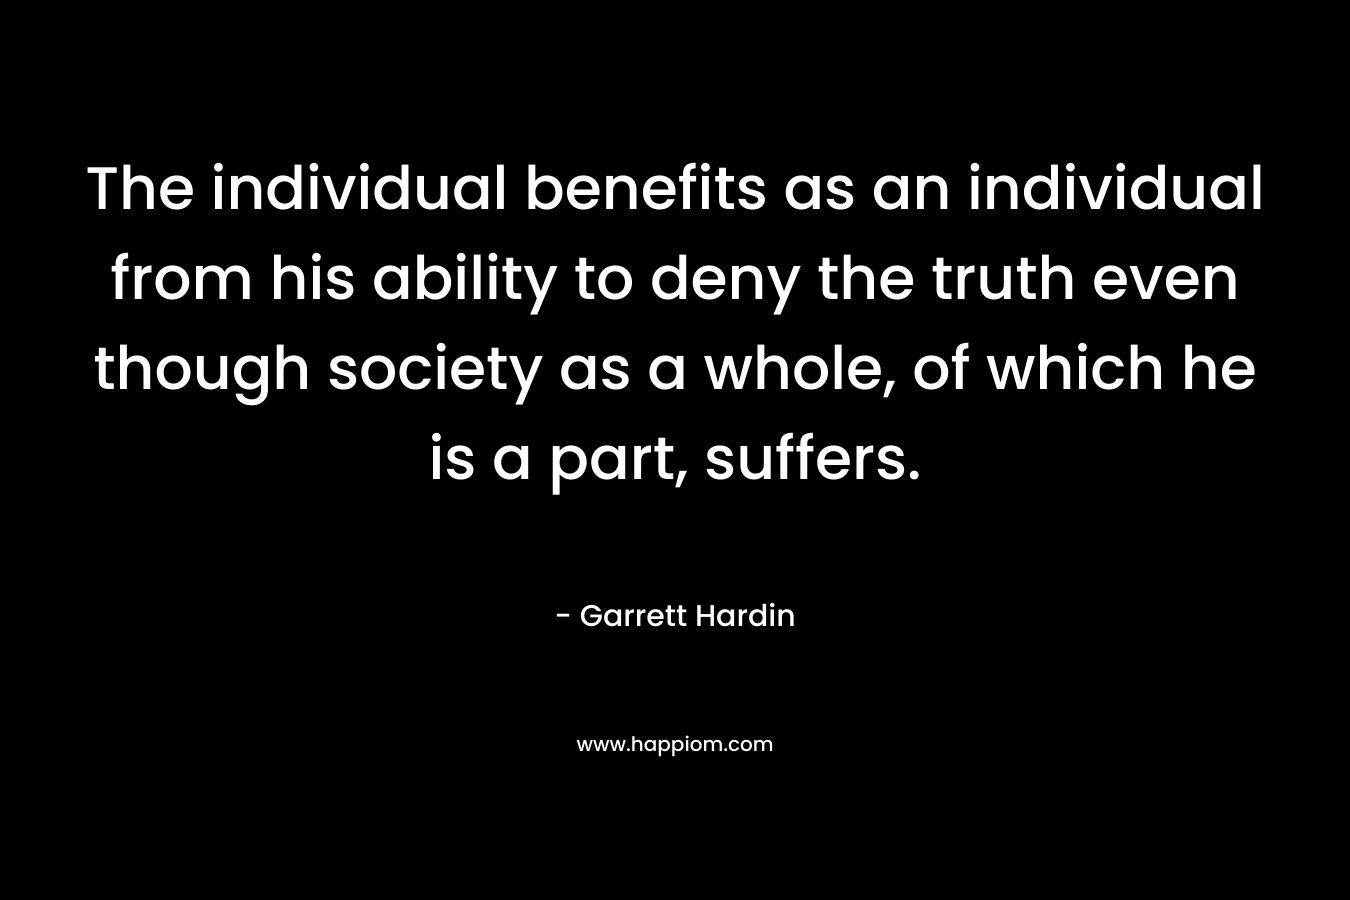 The individual benefits as an individual from his ability to deny the truth even though society as a whole, of which he is a part, suffers.